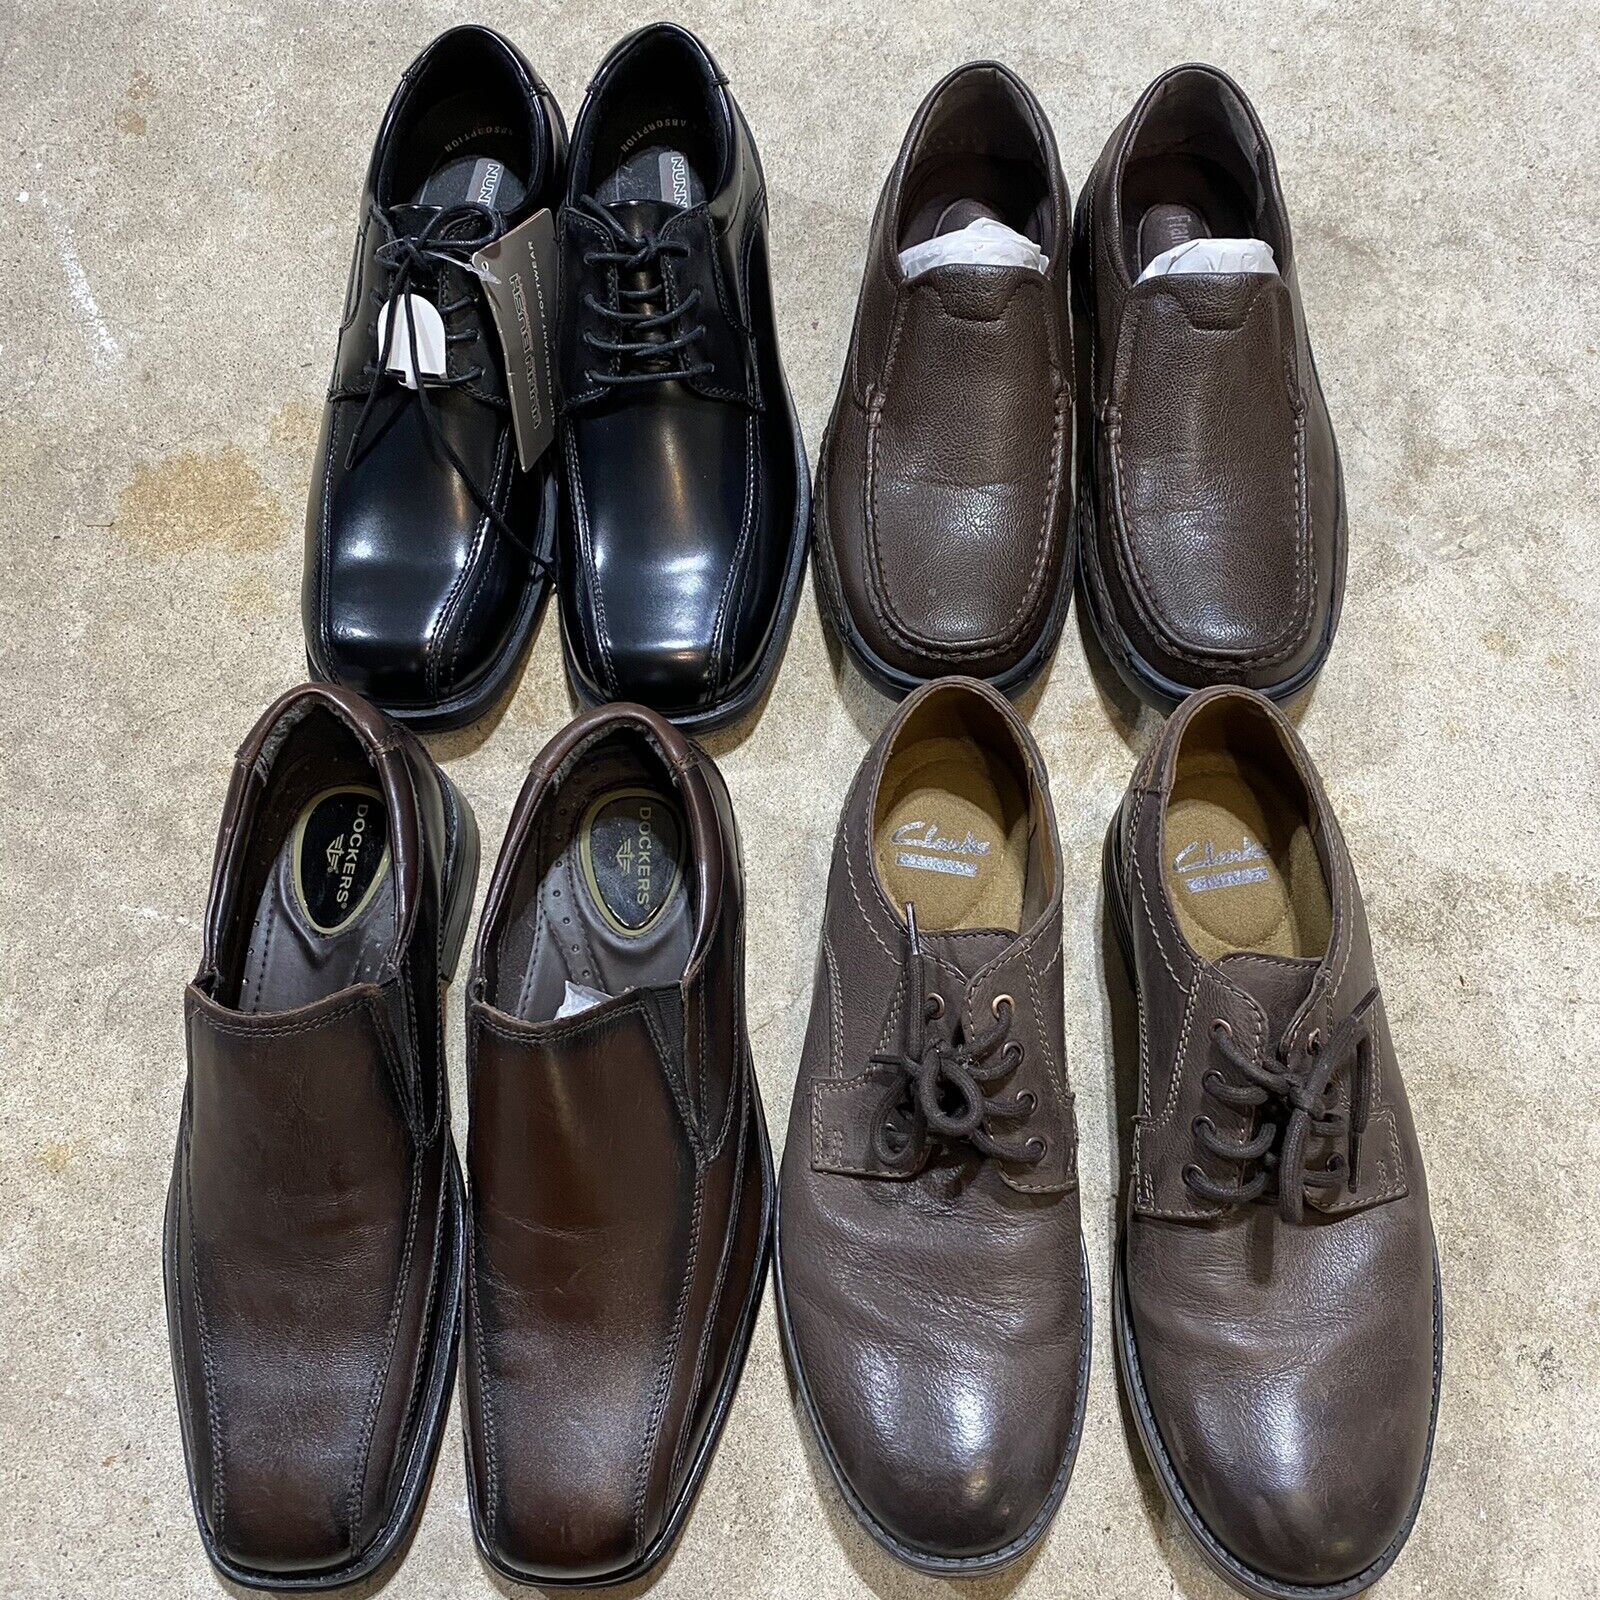 Lot of Four (4) Pairs Mens Shoes US Sizes 9 and 9.5 GREAT SHAPE Dockers Clarks Nike